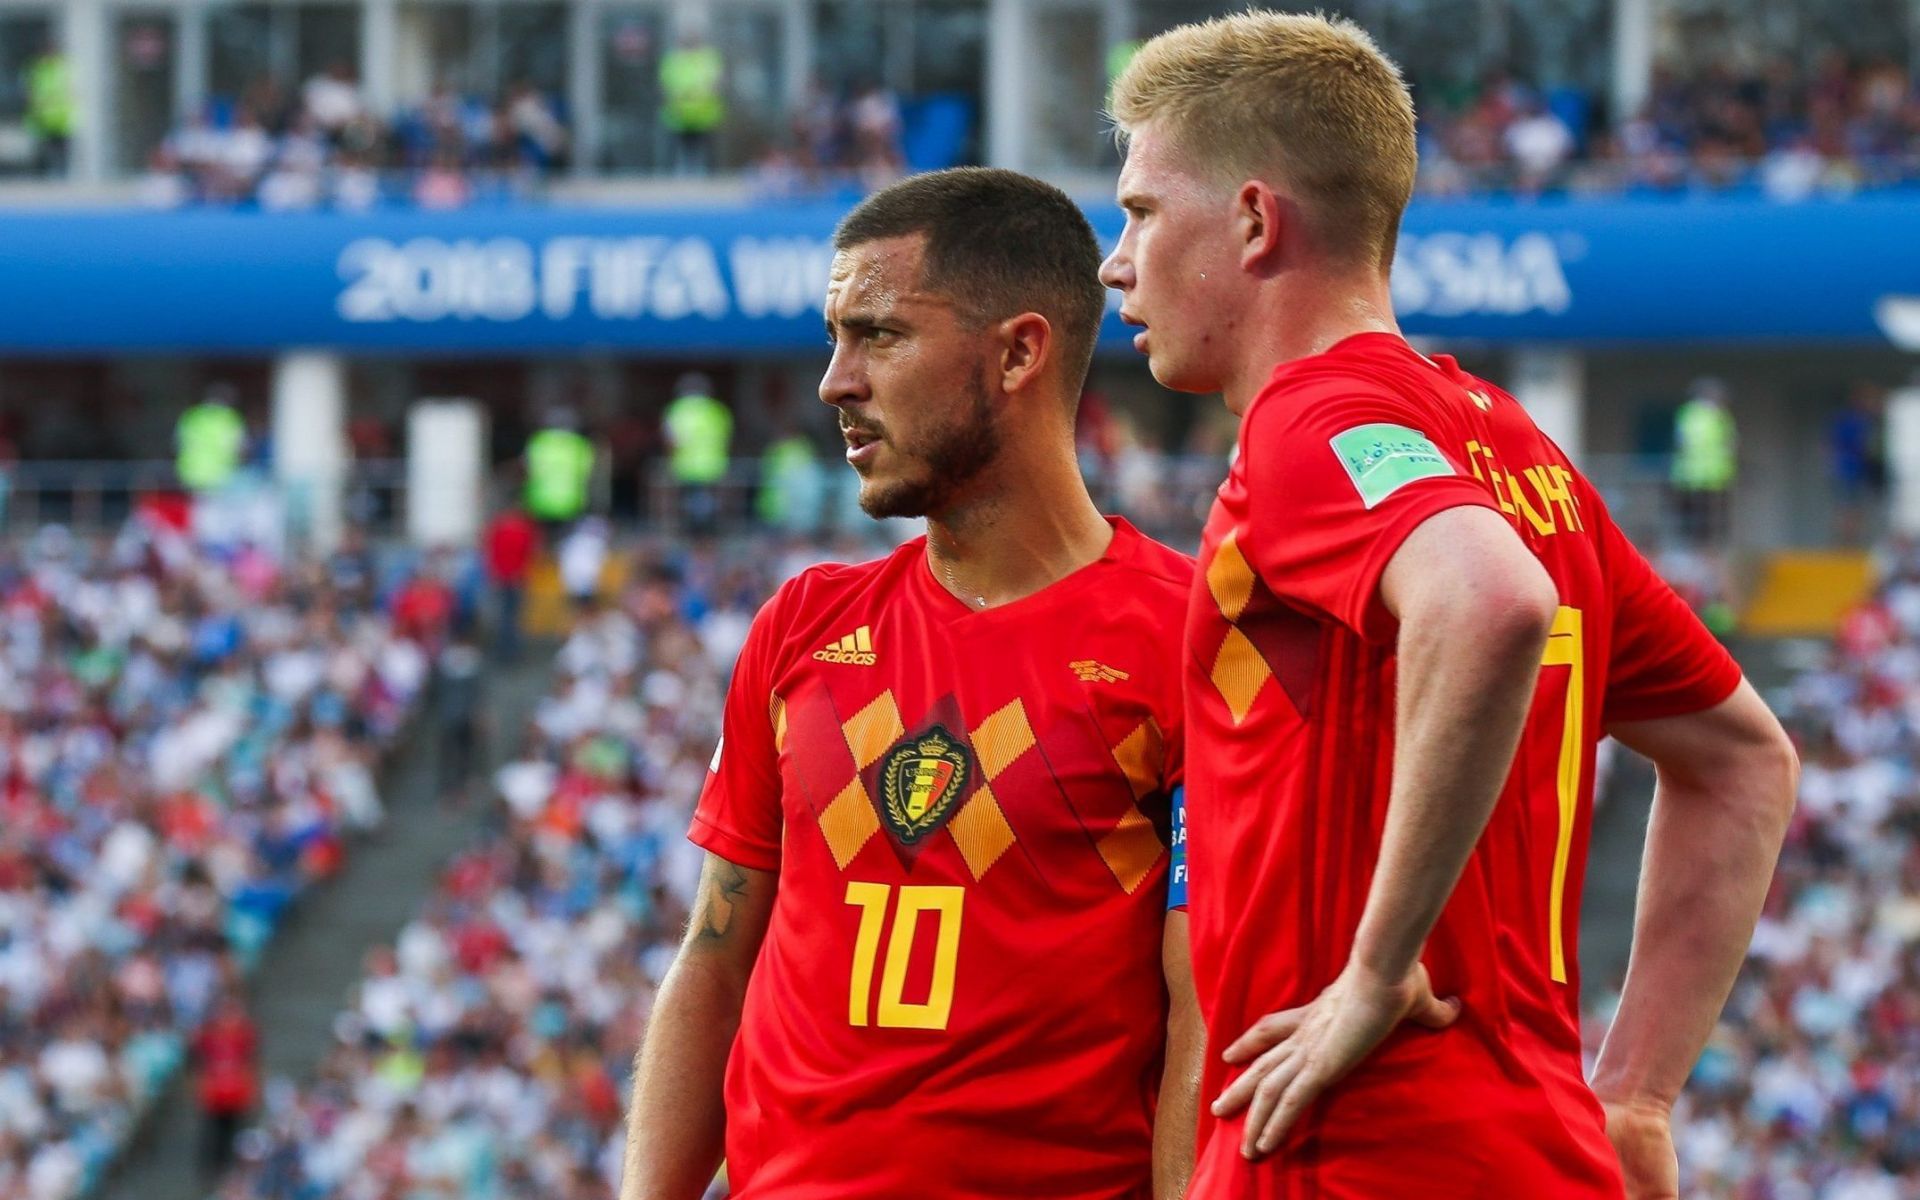 Eden Hazard (left) and Kevin De Bruyne have been the heartbeat for Belgium in recent times.